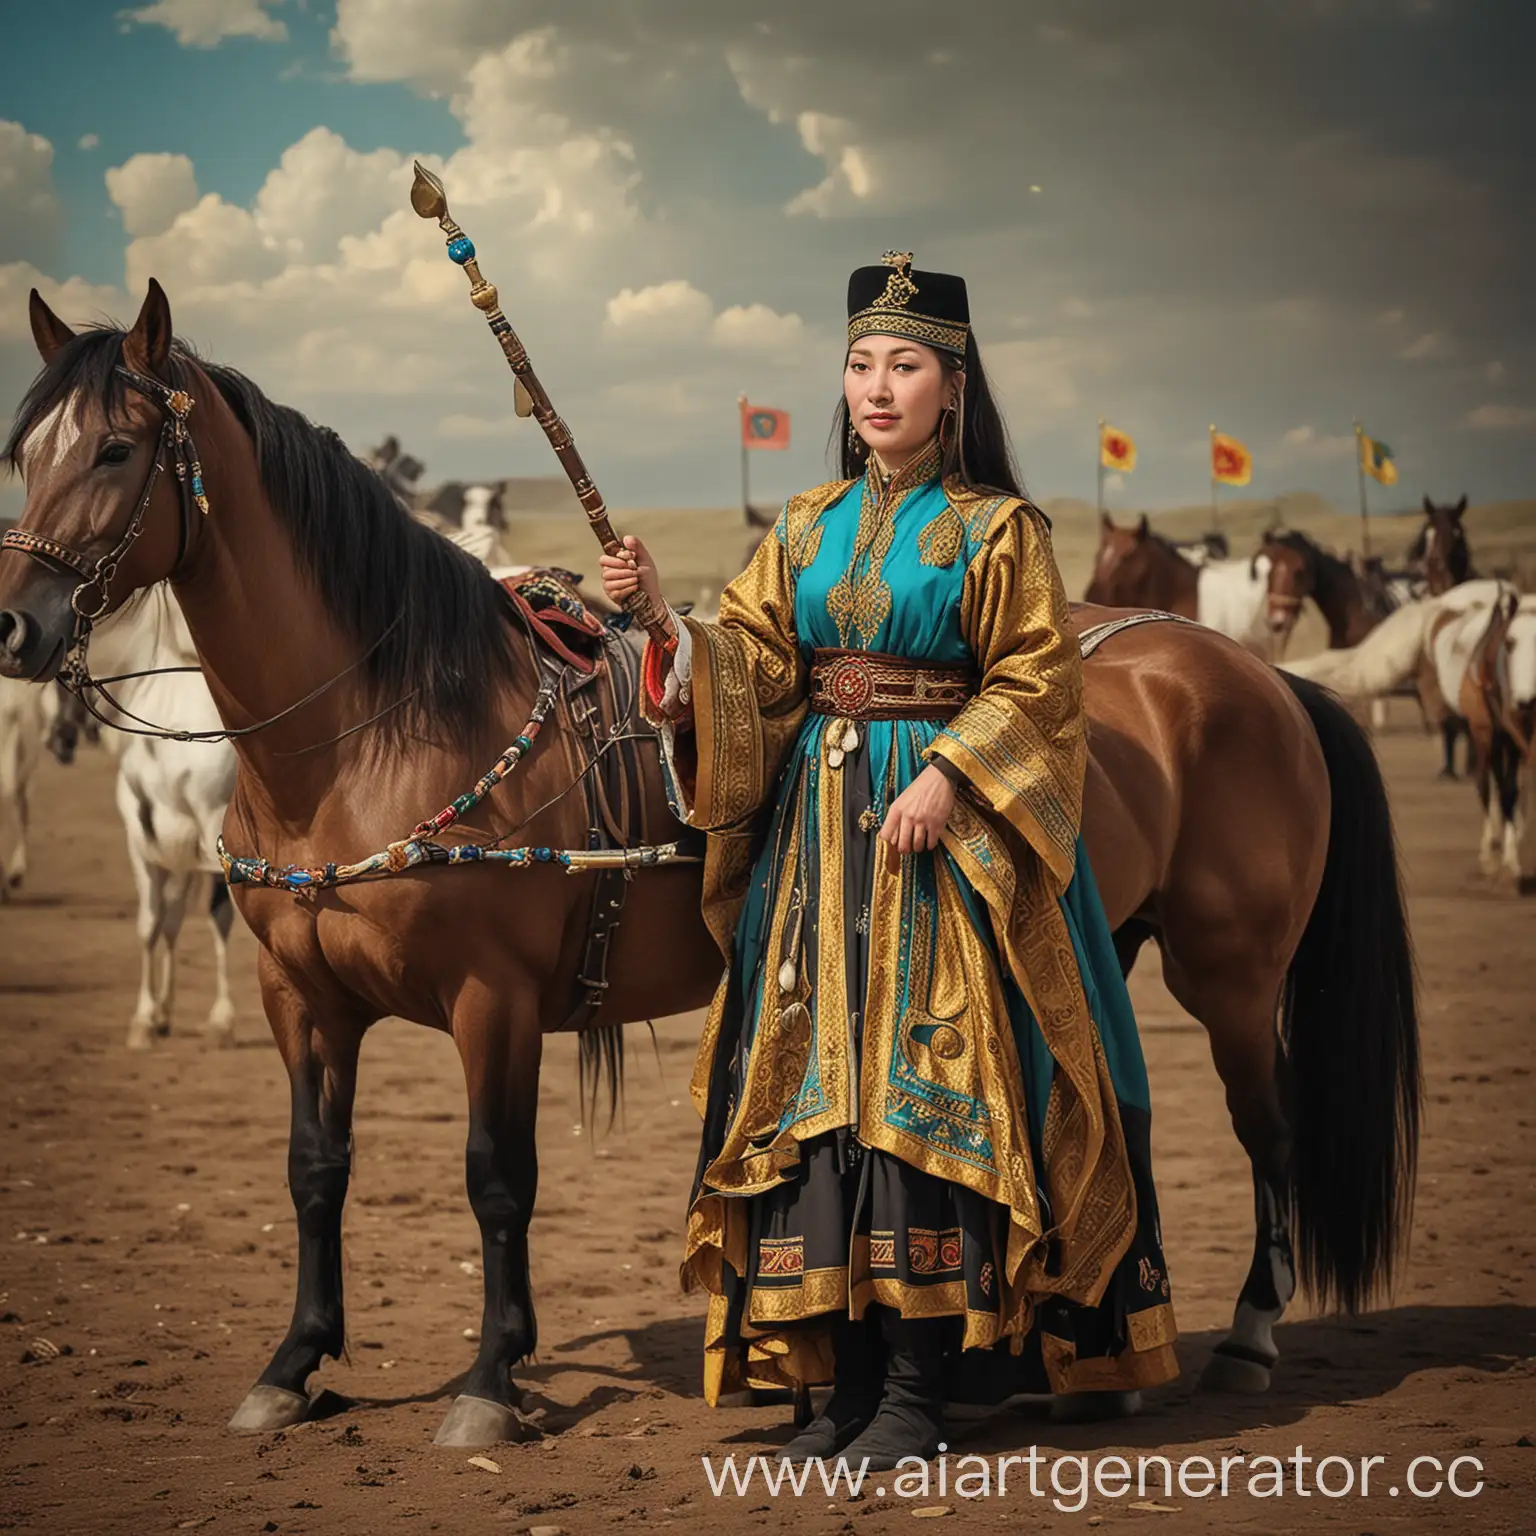 kazakh people very rich and smar, Dombyra musical instrument, horse, flag